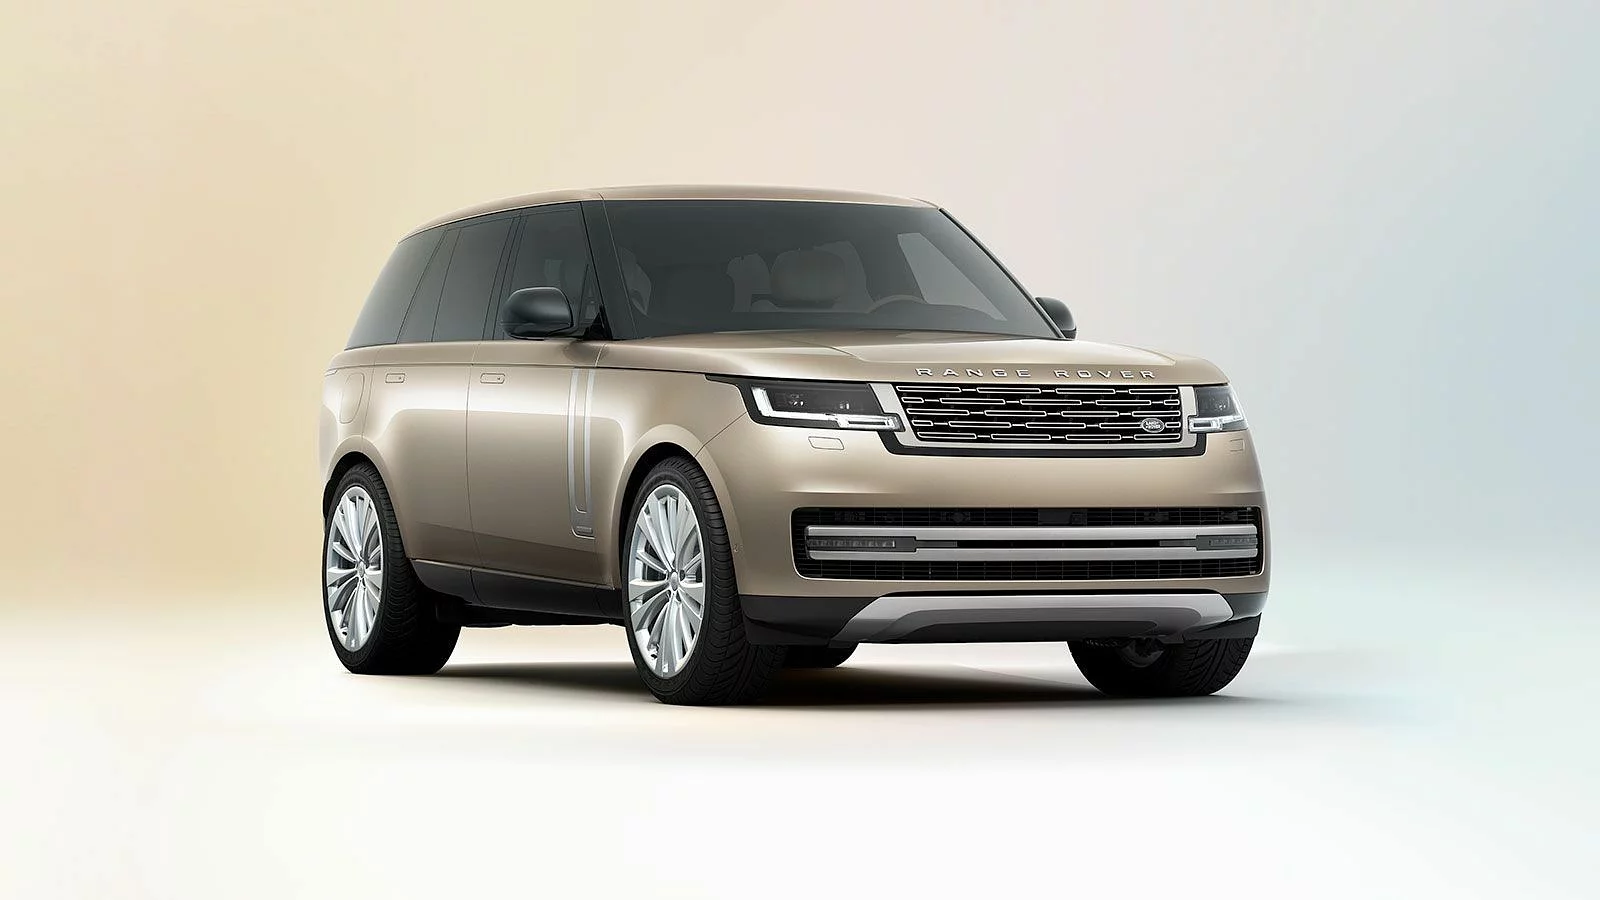 <span style="font-size:1.25rem">NEW RANGE ROVER</span>
SPECIFICATION